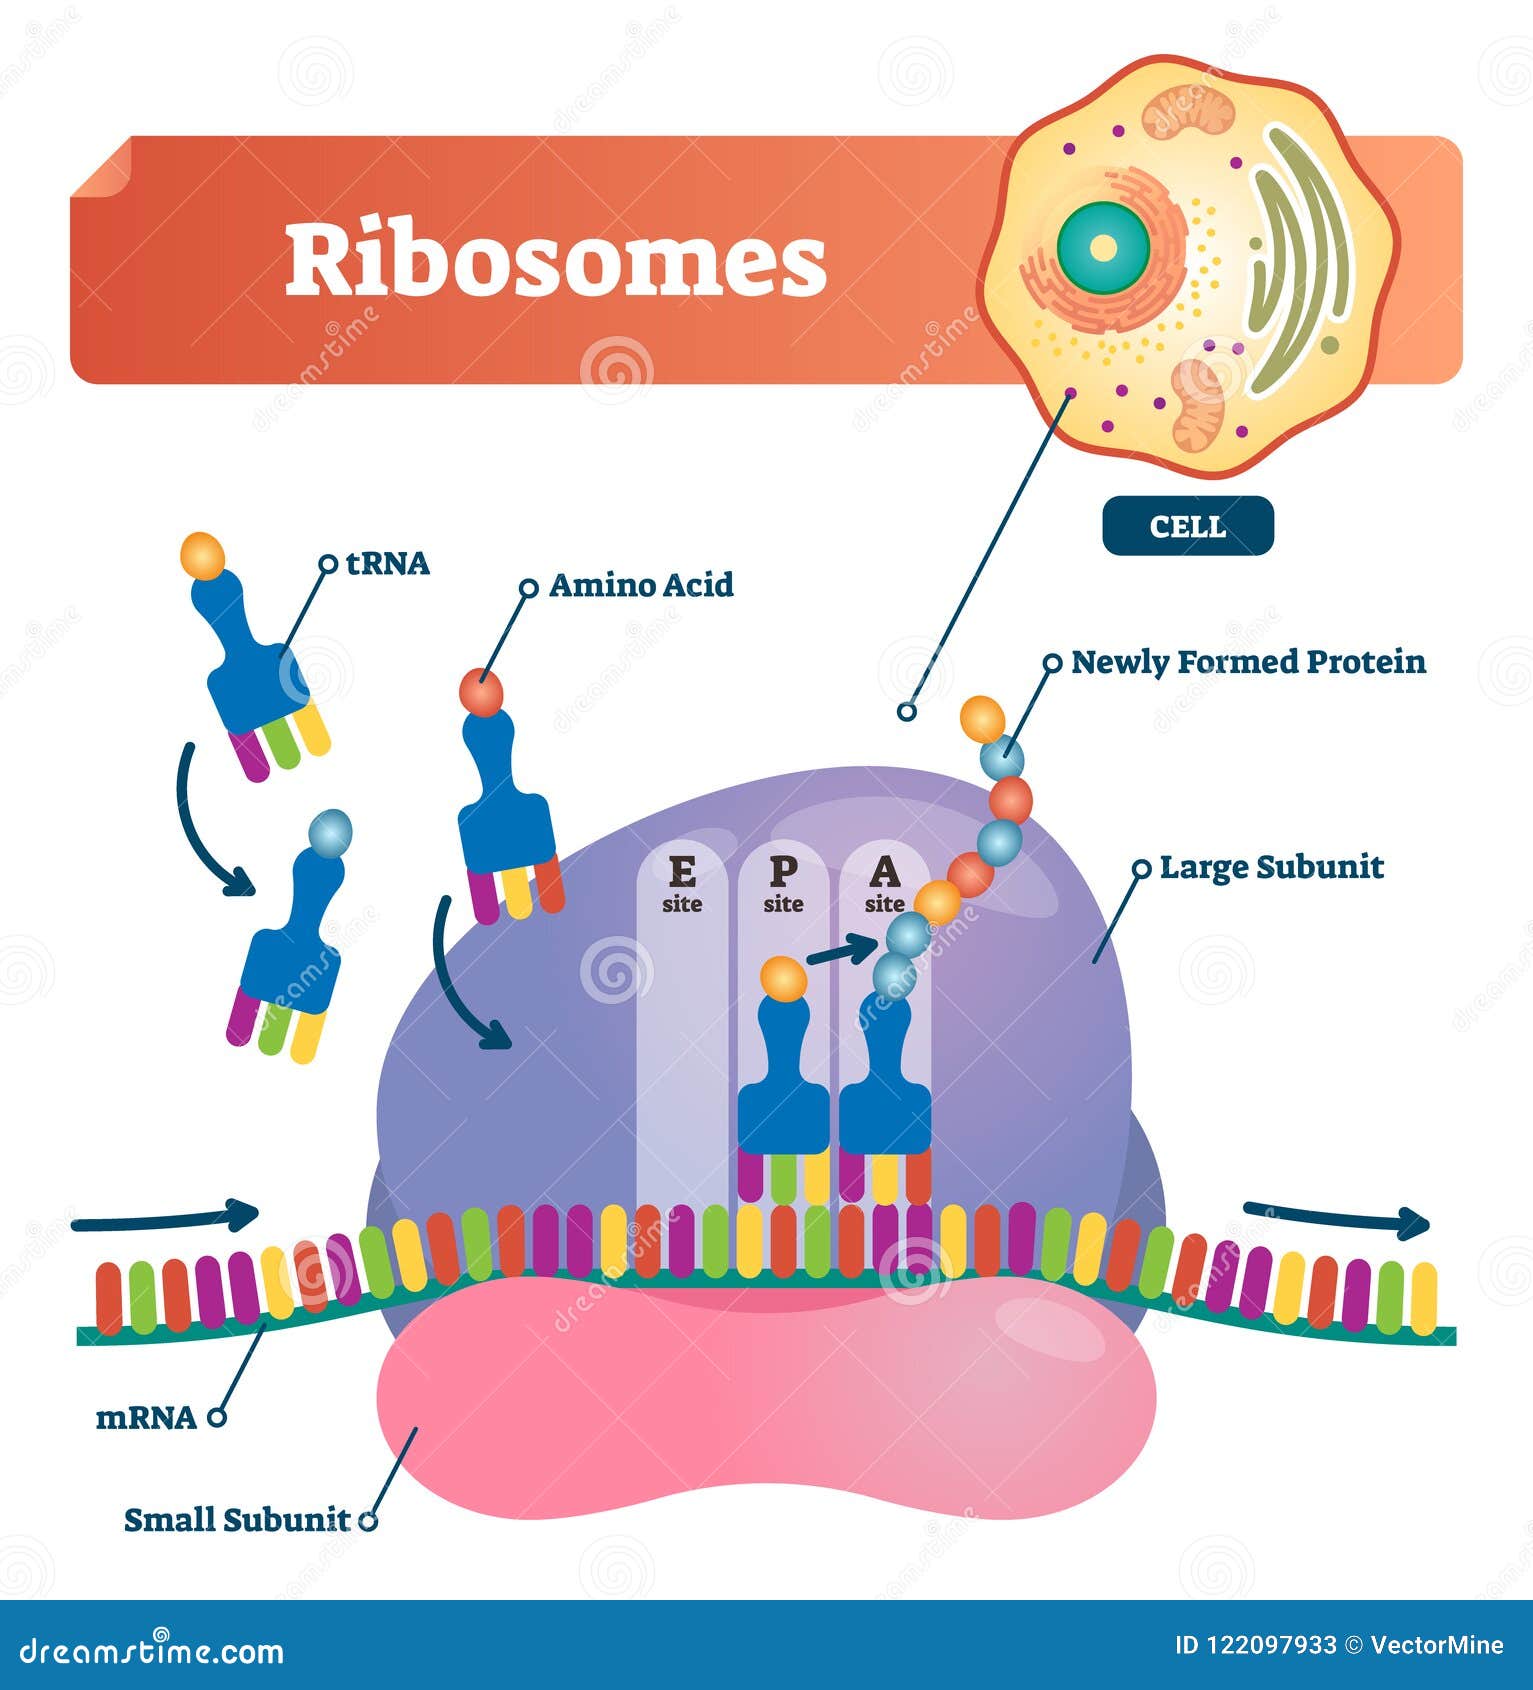 ribosomes  . anatomical and medical labeled scheme. explained closeup diagram.